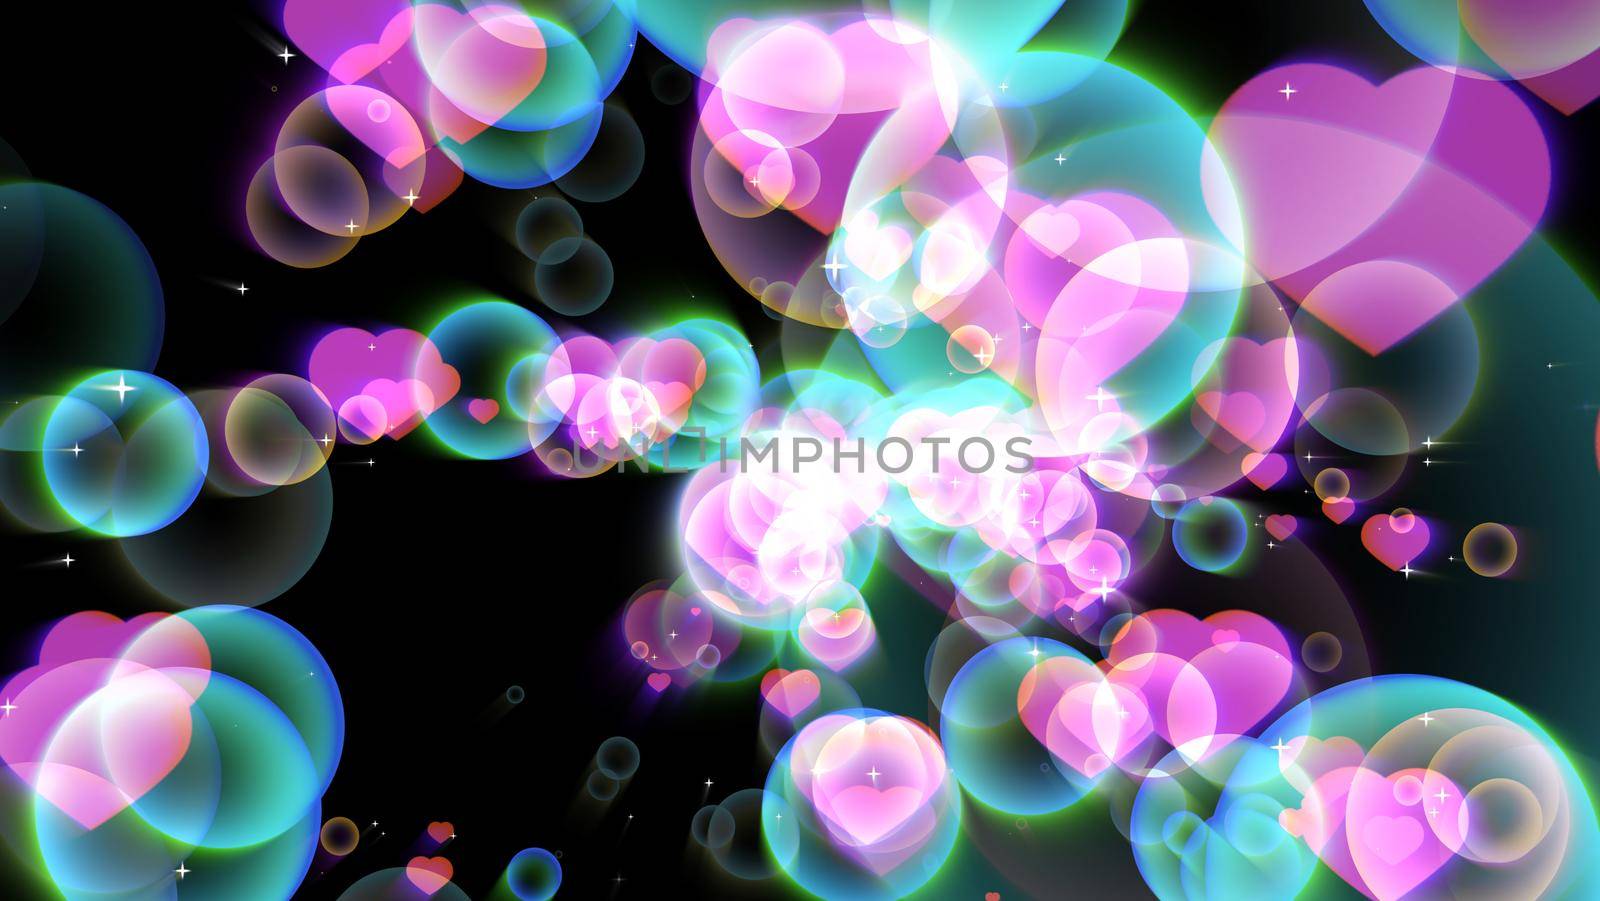 pink hearts aqua bubbles with dancing hearts floating on black screen with white star theme valentine day and love concept